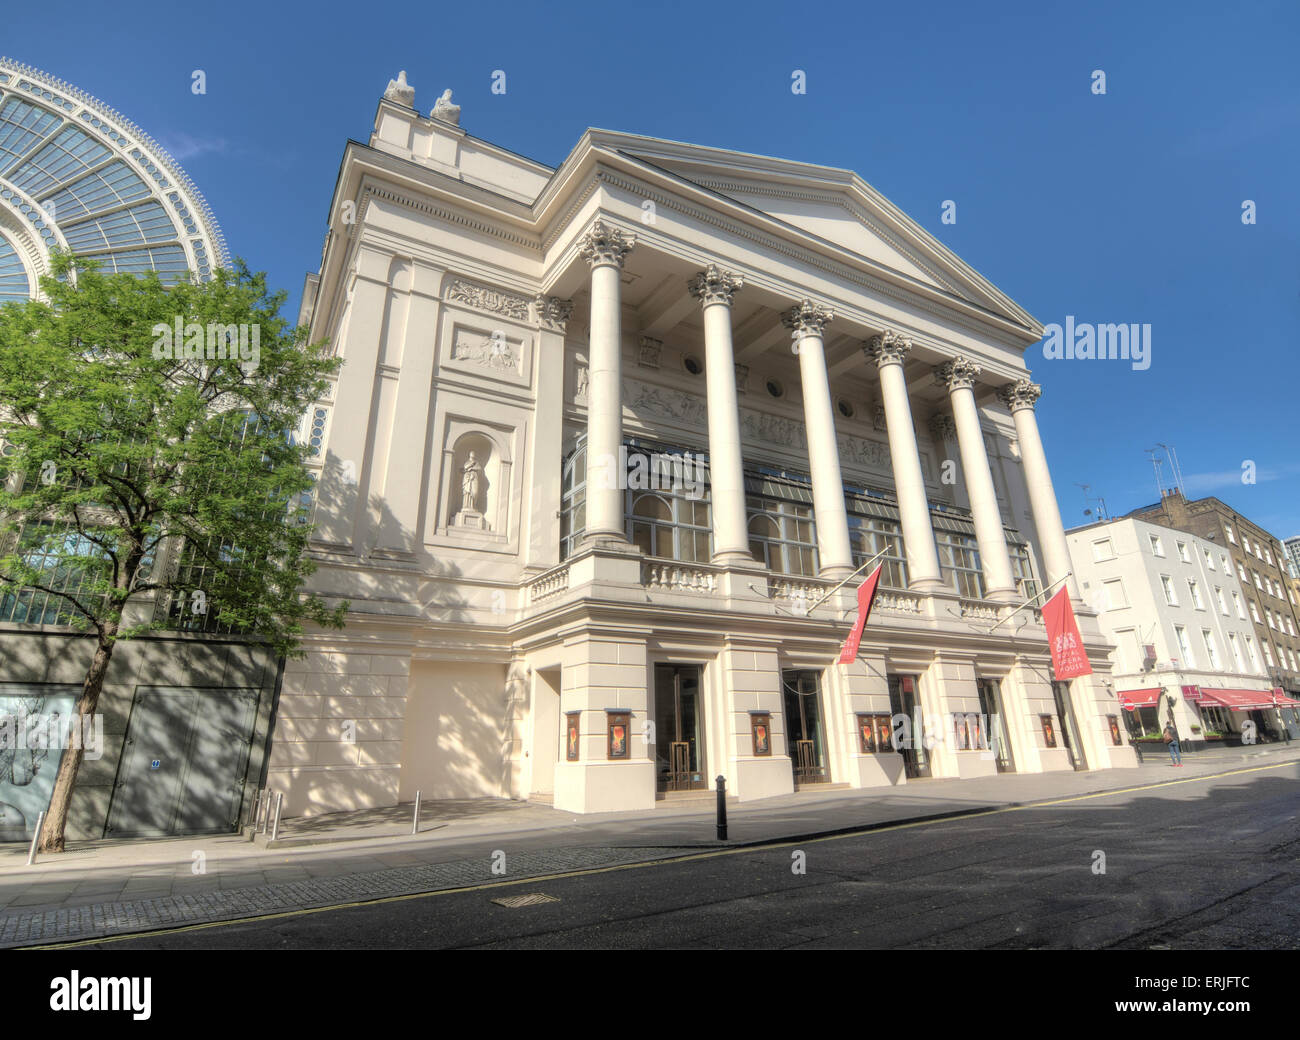 Royal Opera House Covent Garden London Banque D'Images